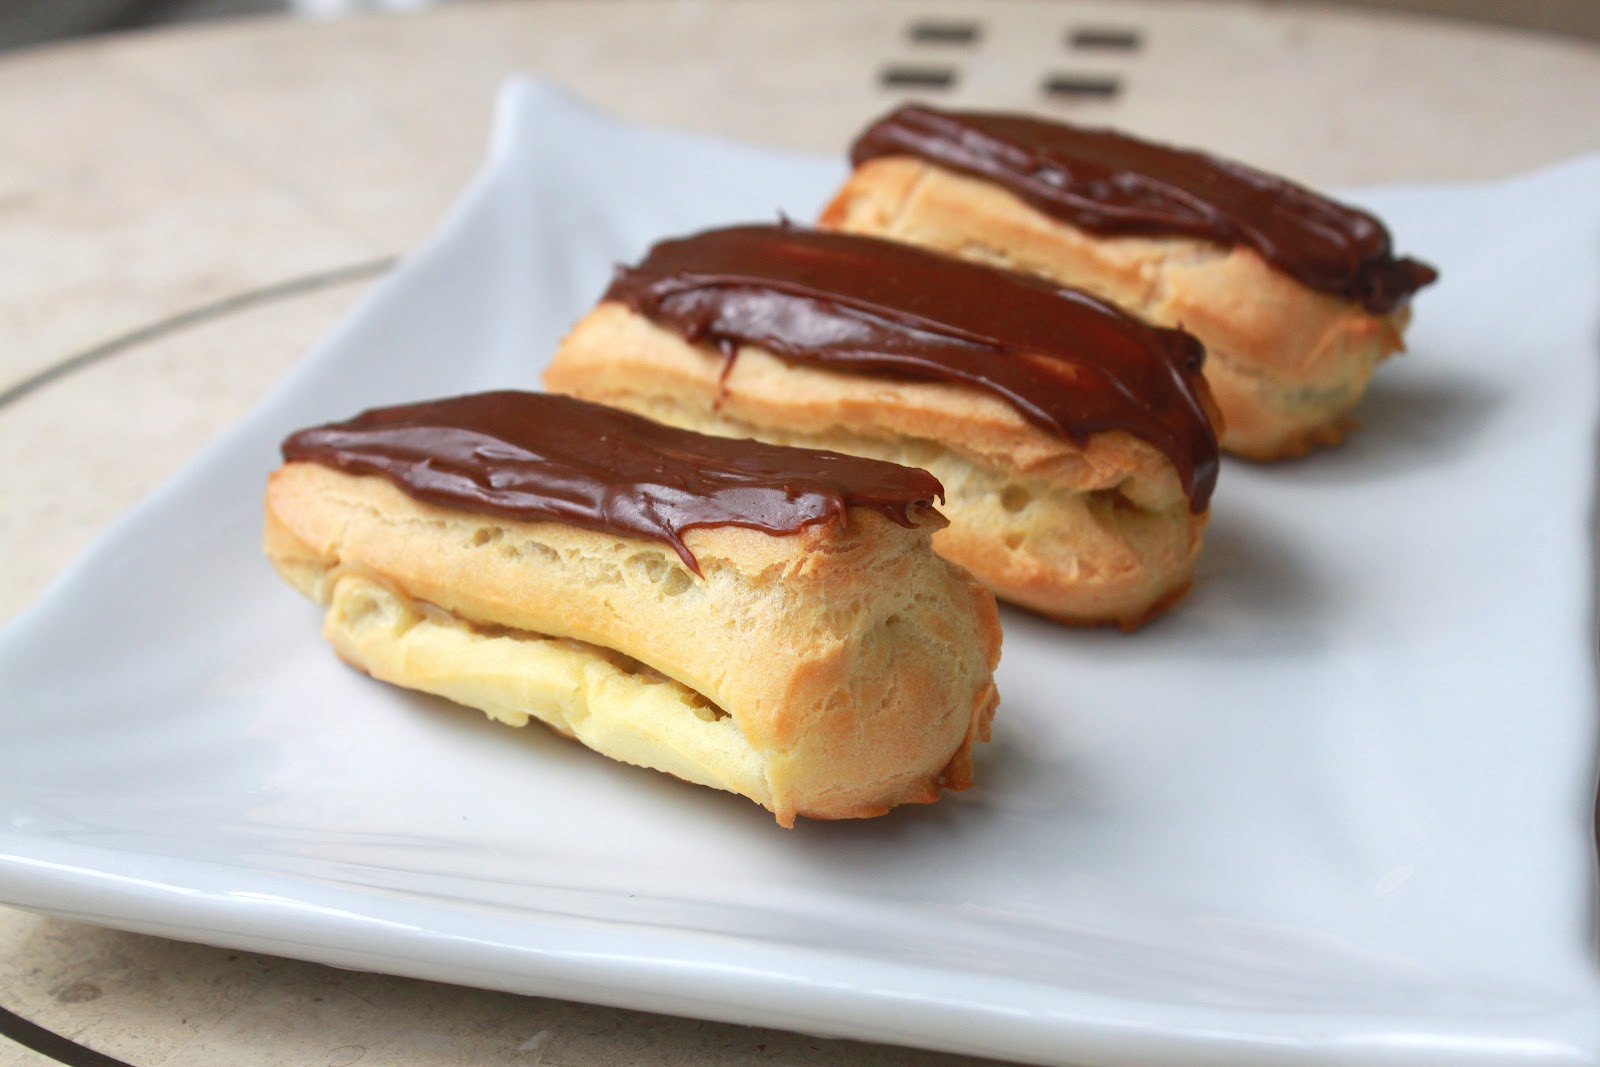 Sucré Marmalade: Eclairs with a mocha pastry cream filling